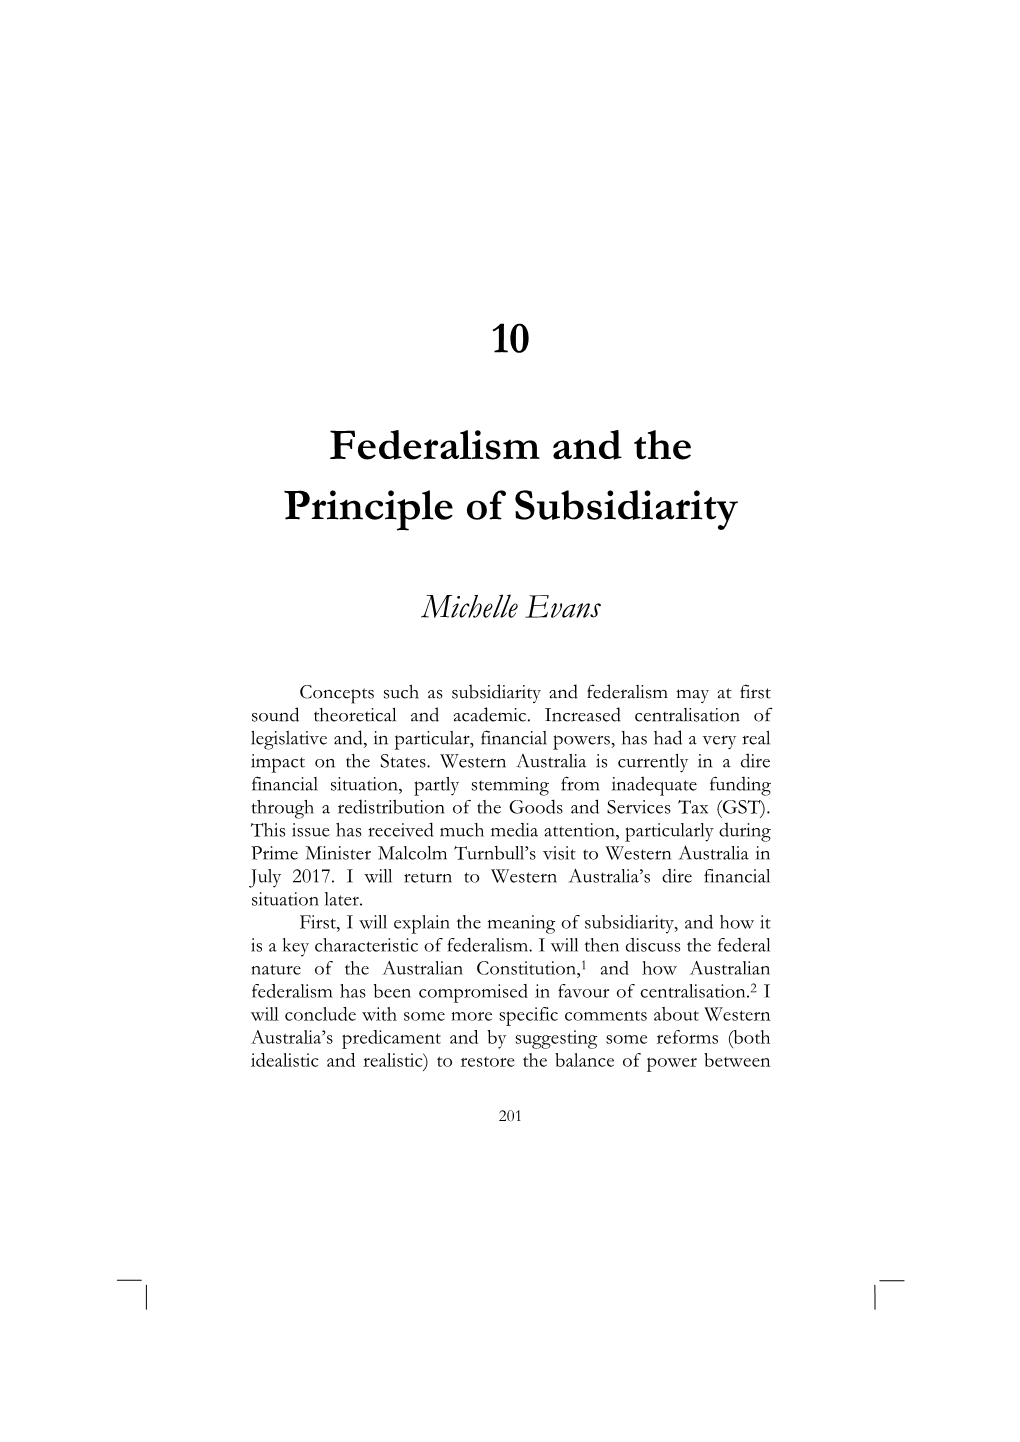 Federalism and the Principle of Subsidiarity